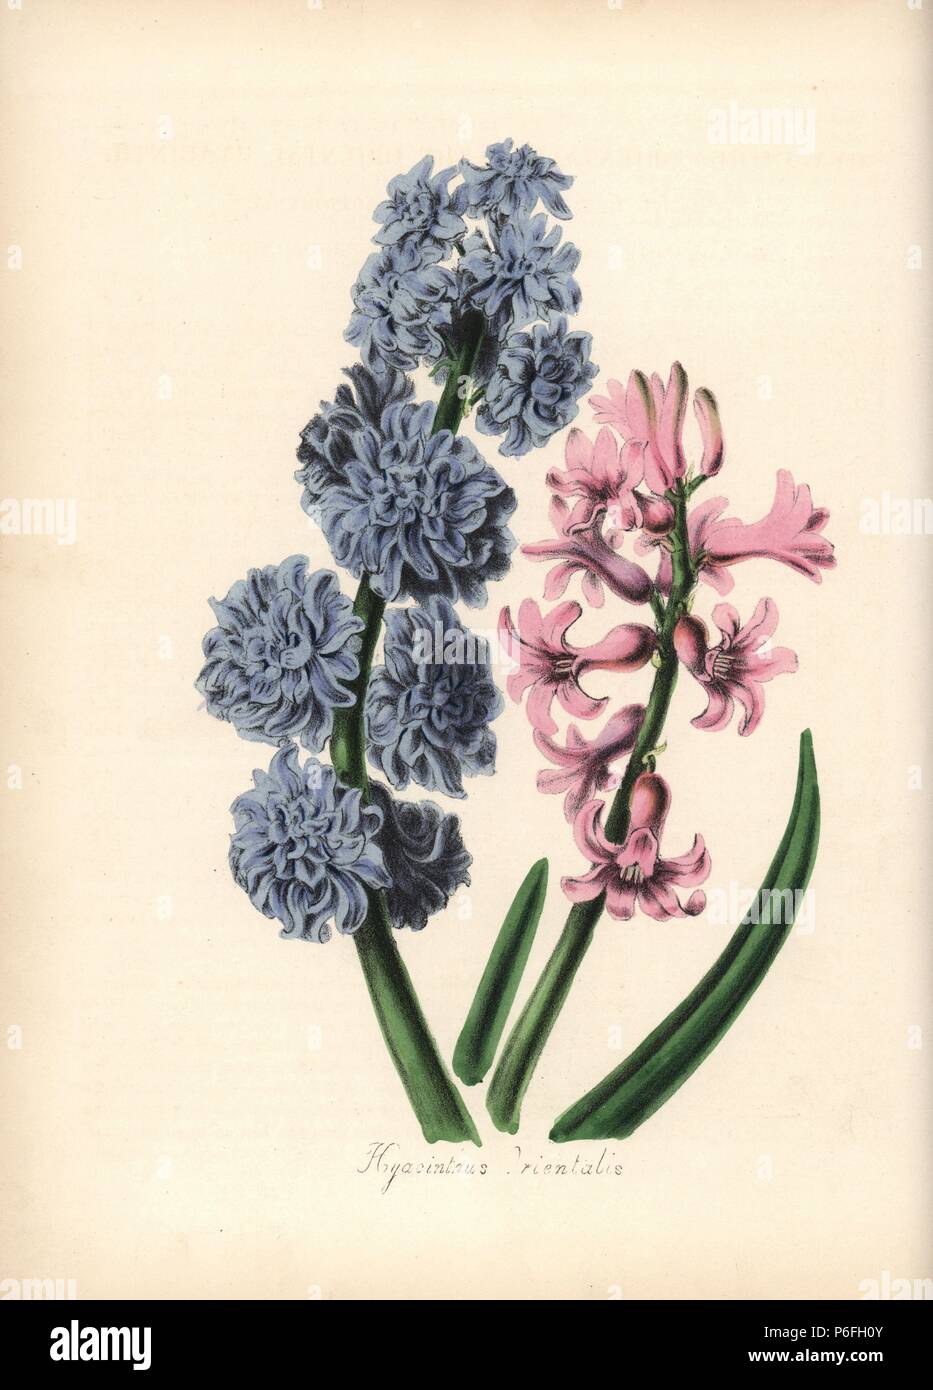 Hyacinth, Hyacinthus orientalis. Handcoloured zincograph by Chabots drawn by Miss M. A. Burnett from her 'Plantae Utiliores: or Illustrations of Useful Plants,' Whittaker, London, 1842. Miss Burnett drew the botanical illustrations, but the text was chiefly by her late brother, British botanist Gilbert Thomas Burnett (1800-1835). Stock Photo